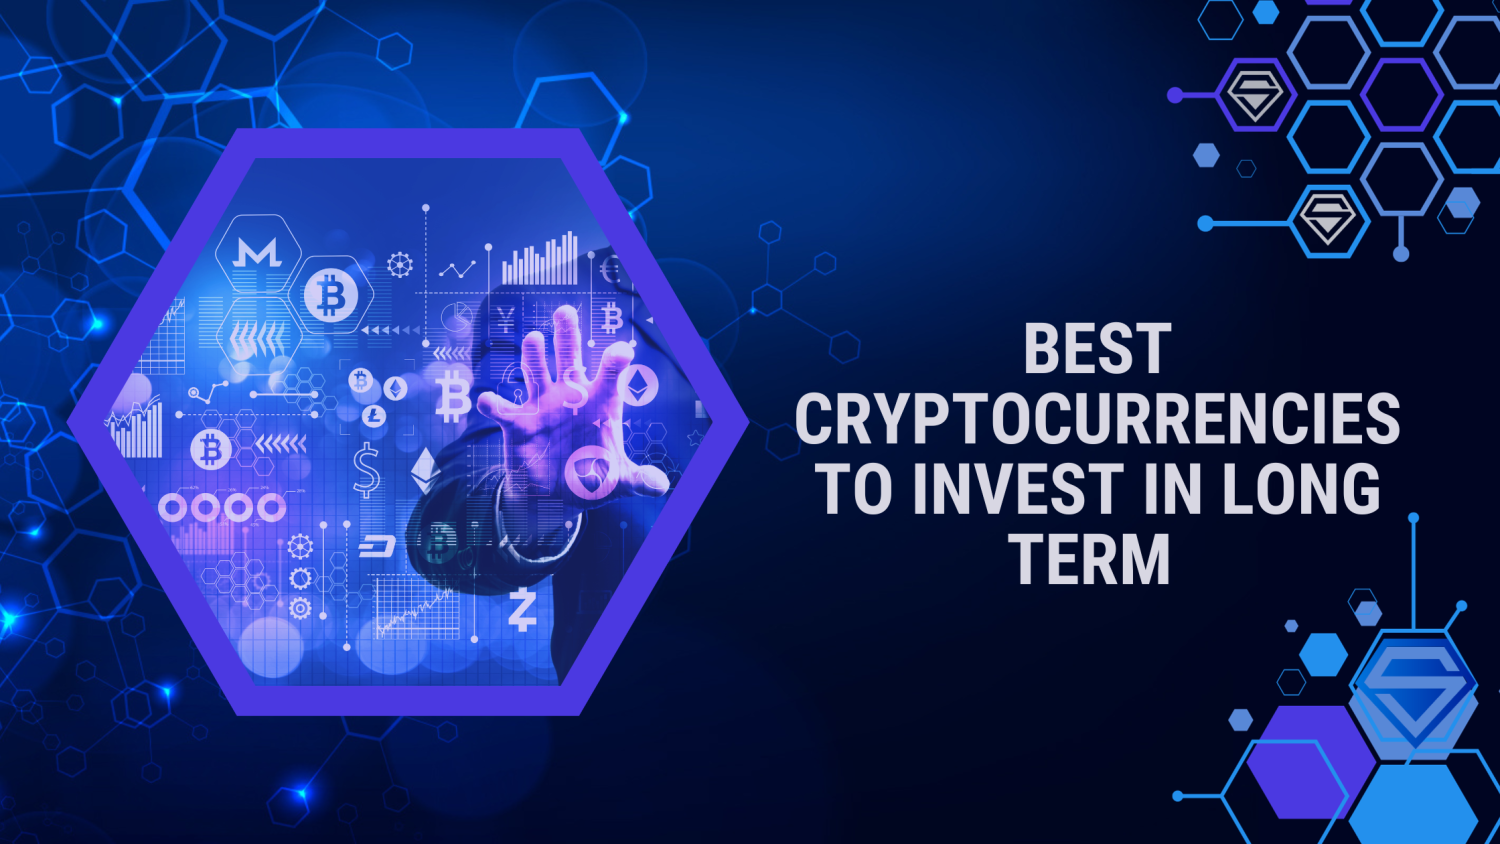 The Best Cryptocurrencies to Invest in Long Term and Why